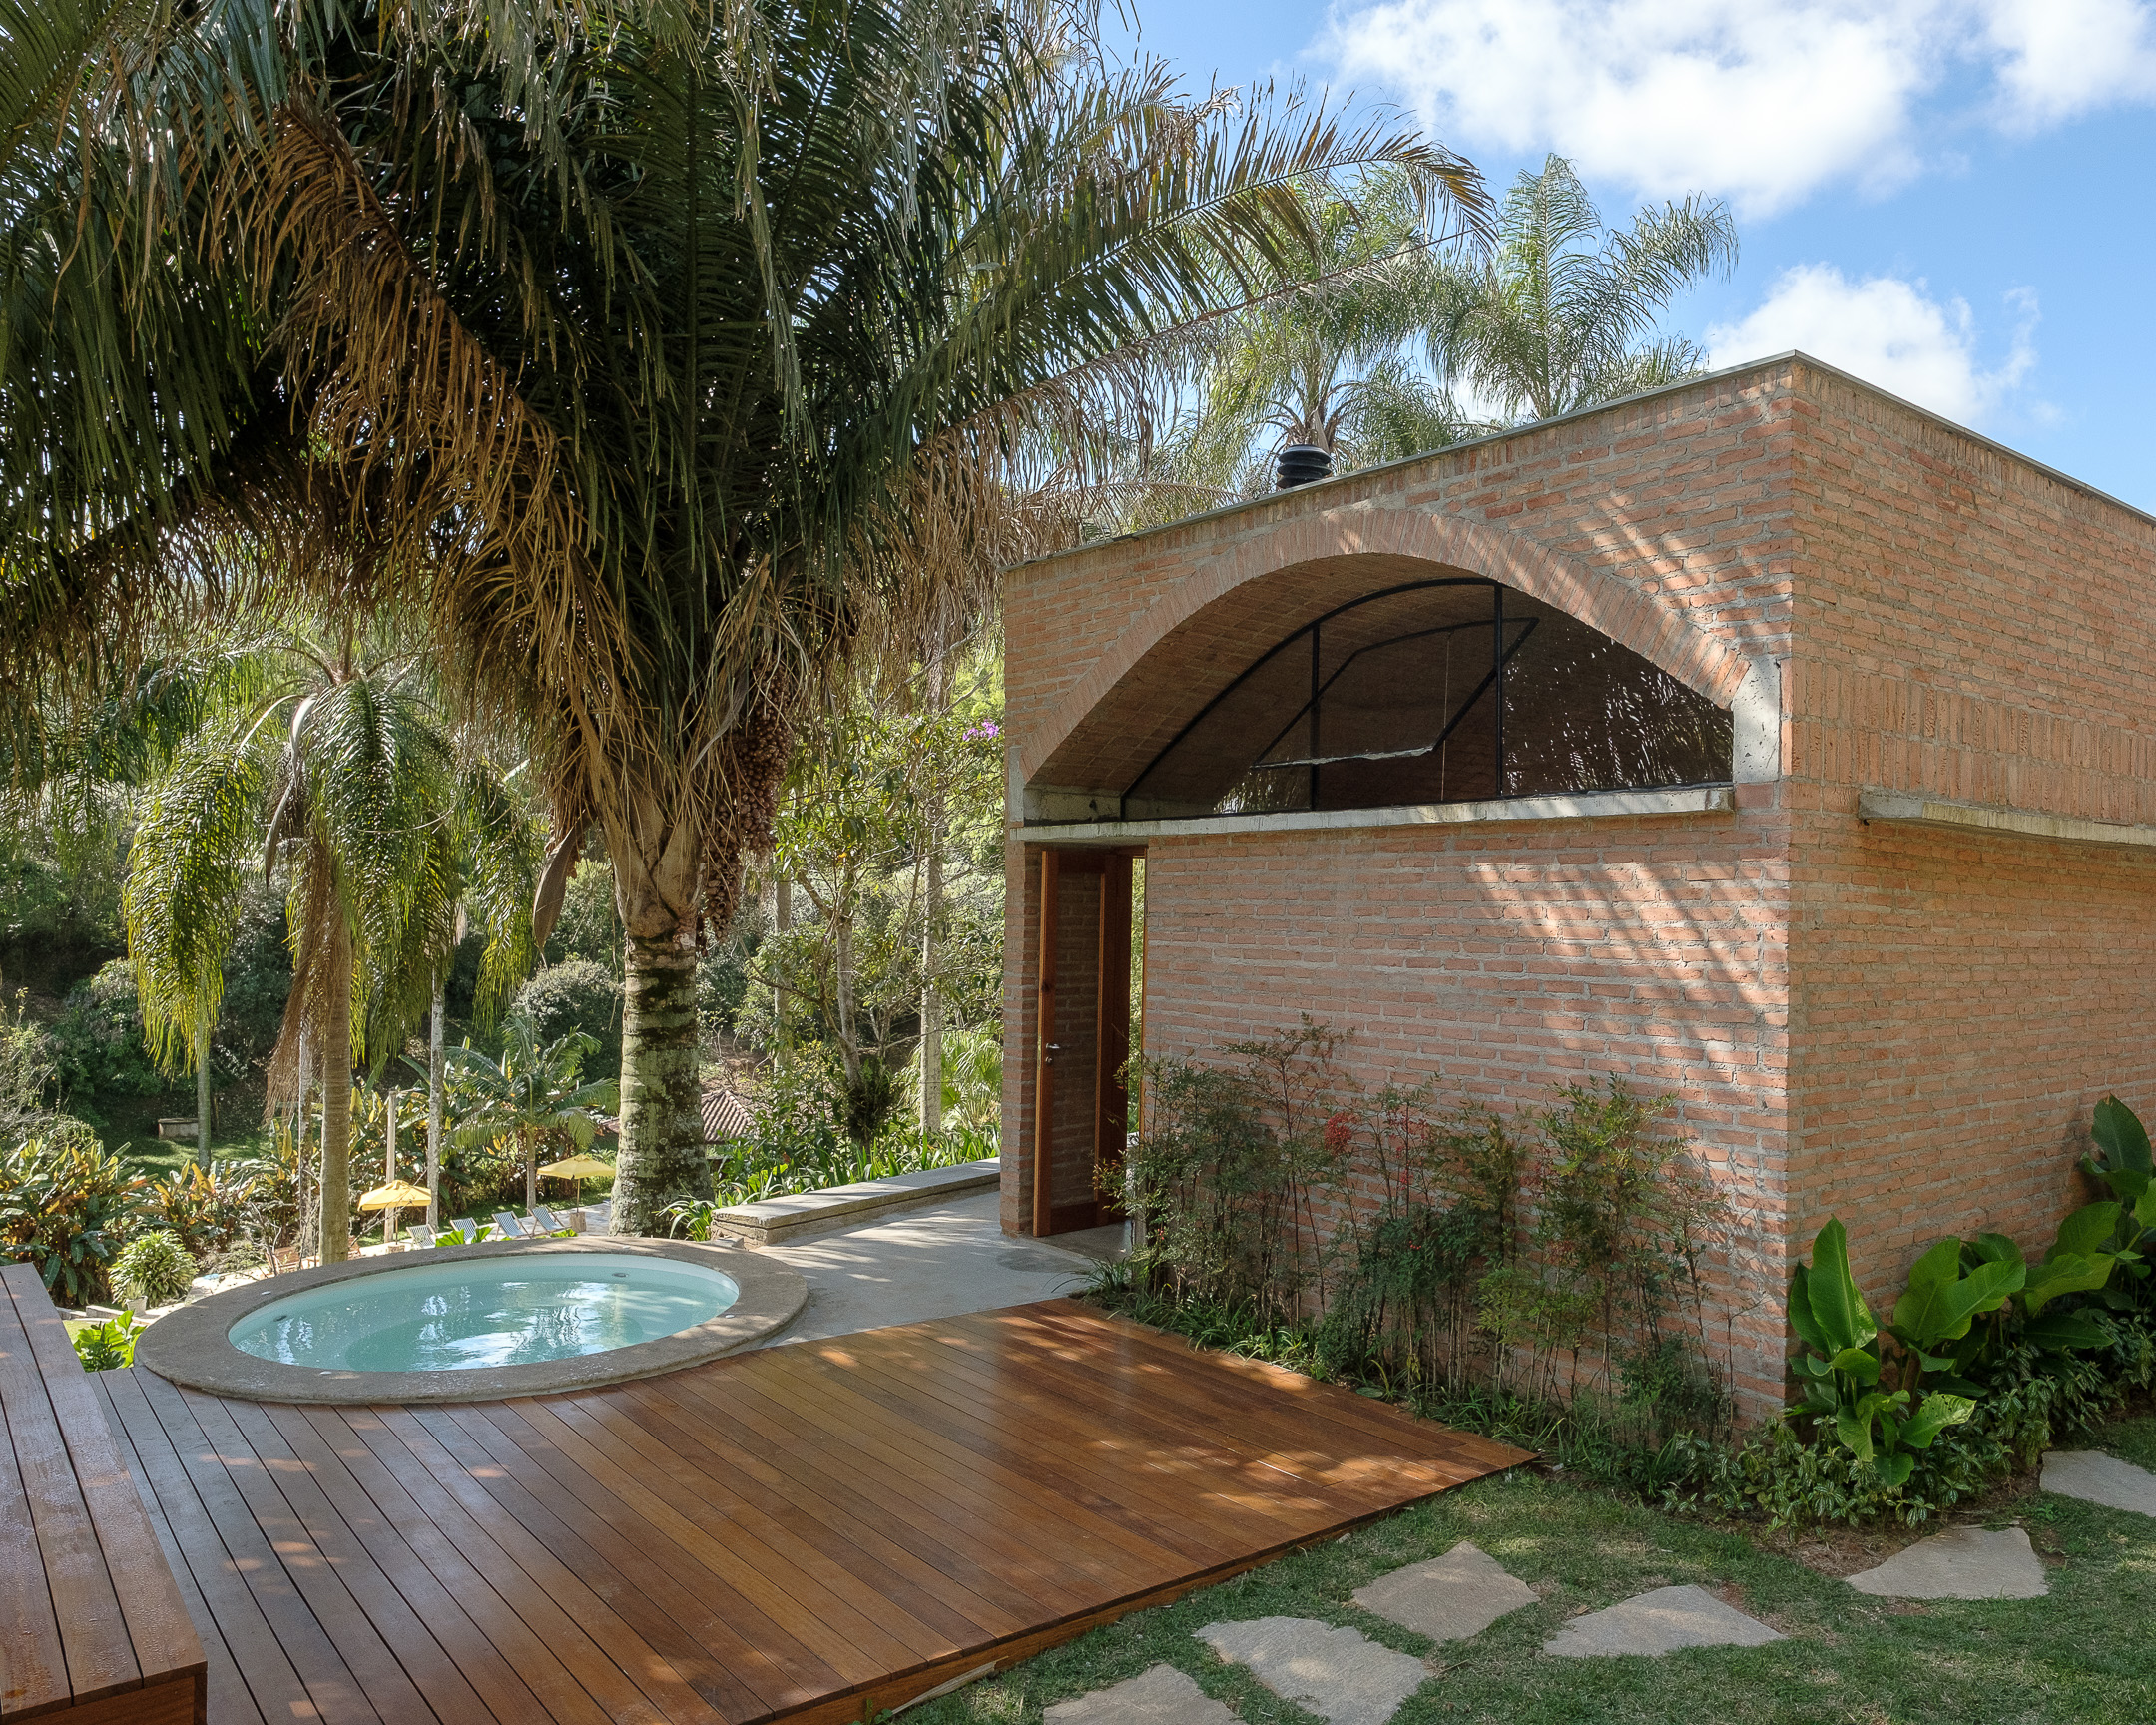 Brick cubed building with a ceramic vaulted ceiling next to a small plunge pool surrounded by decking